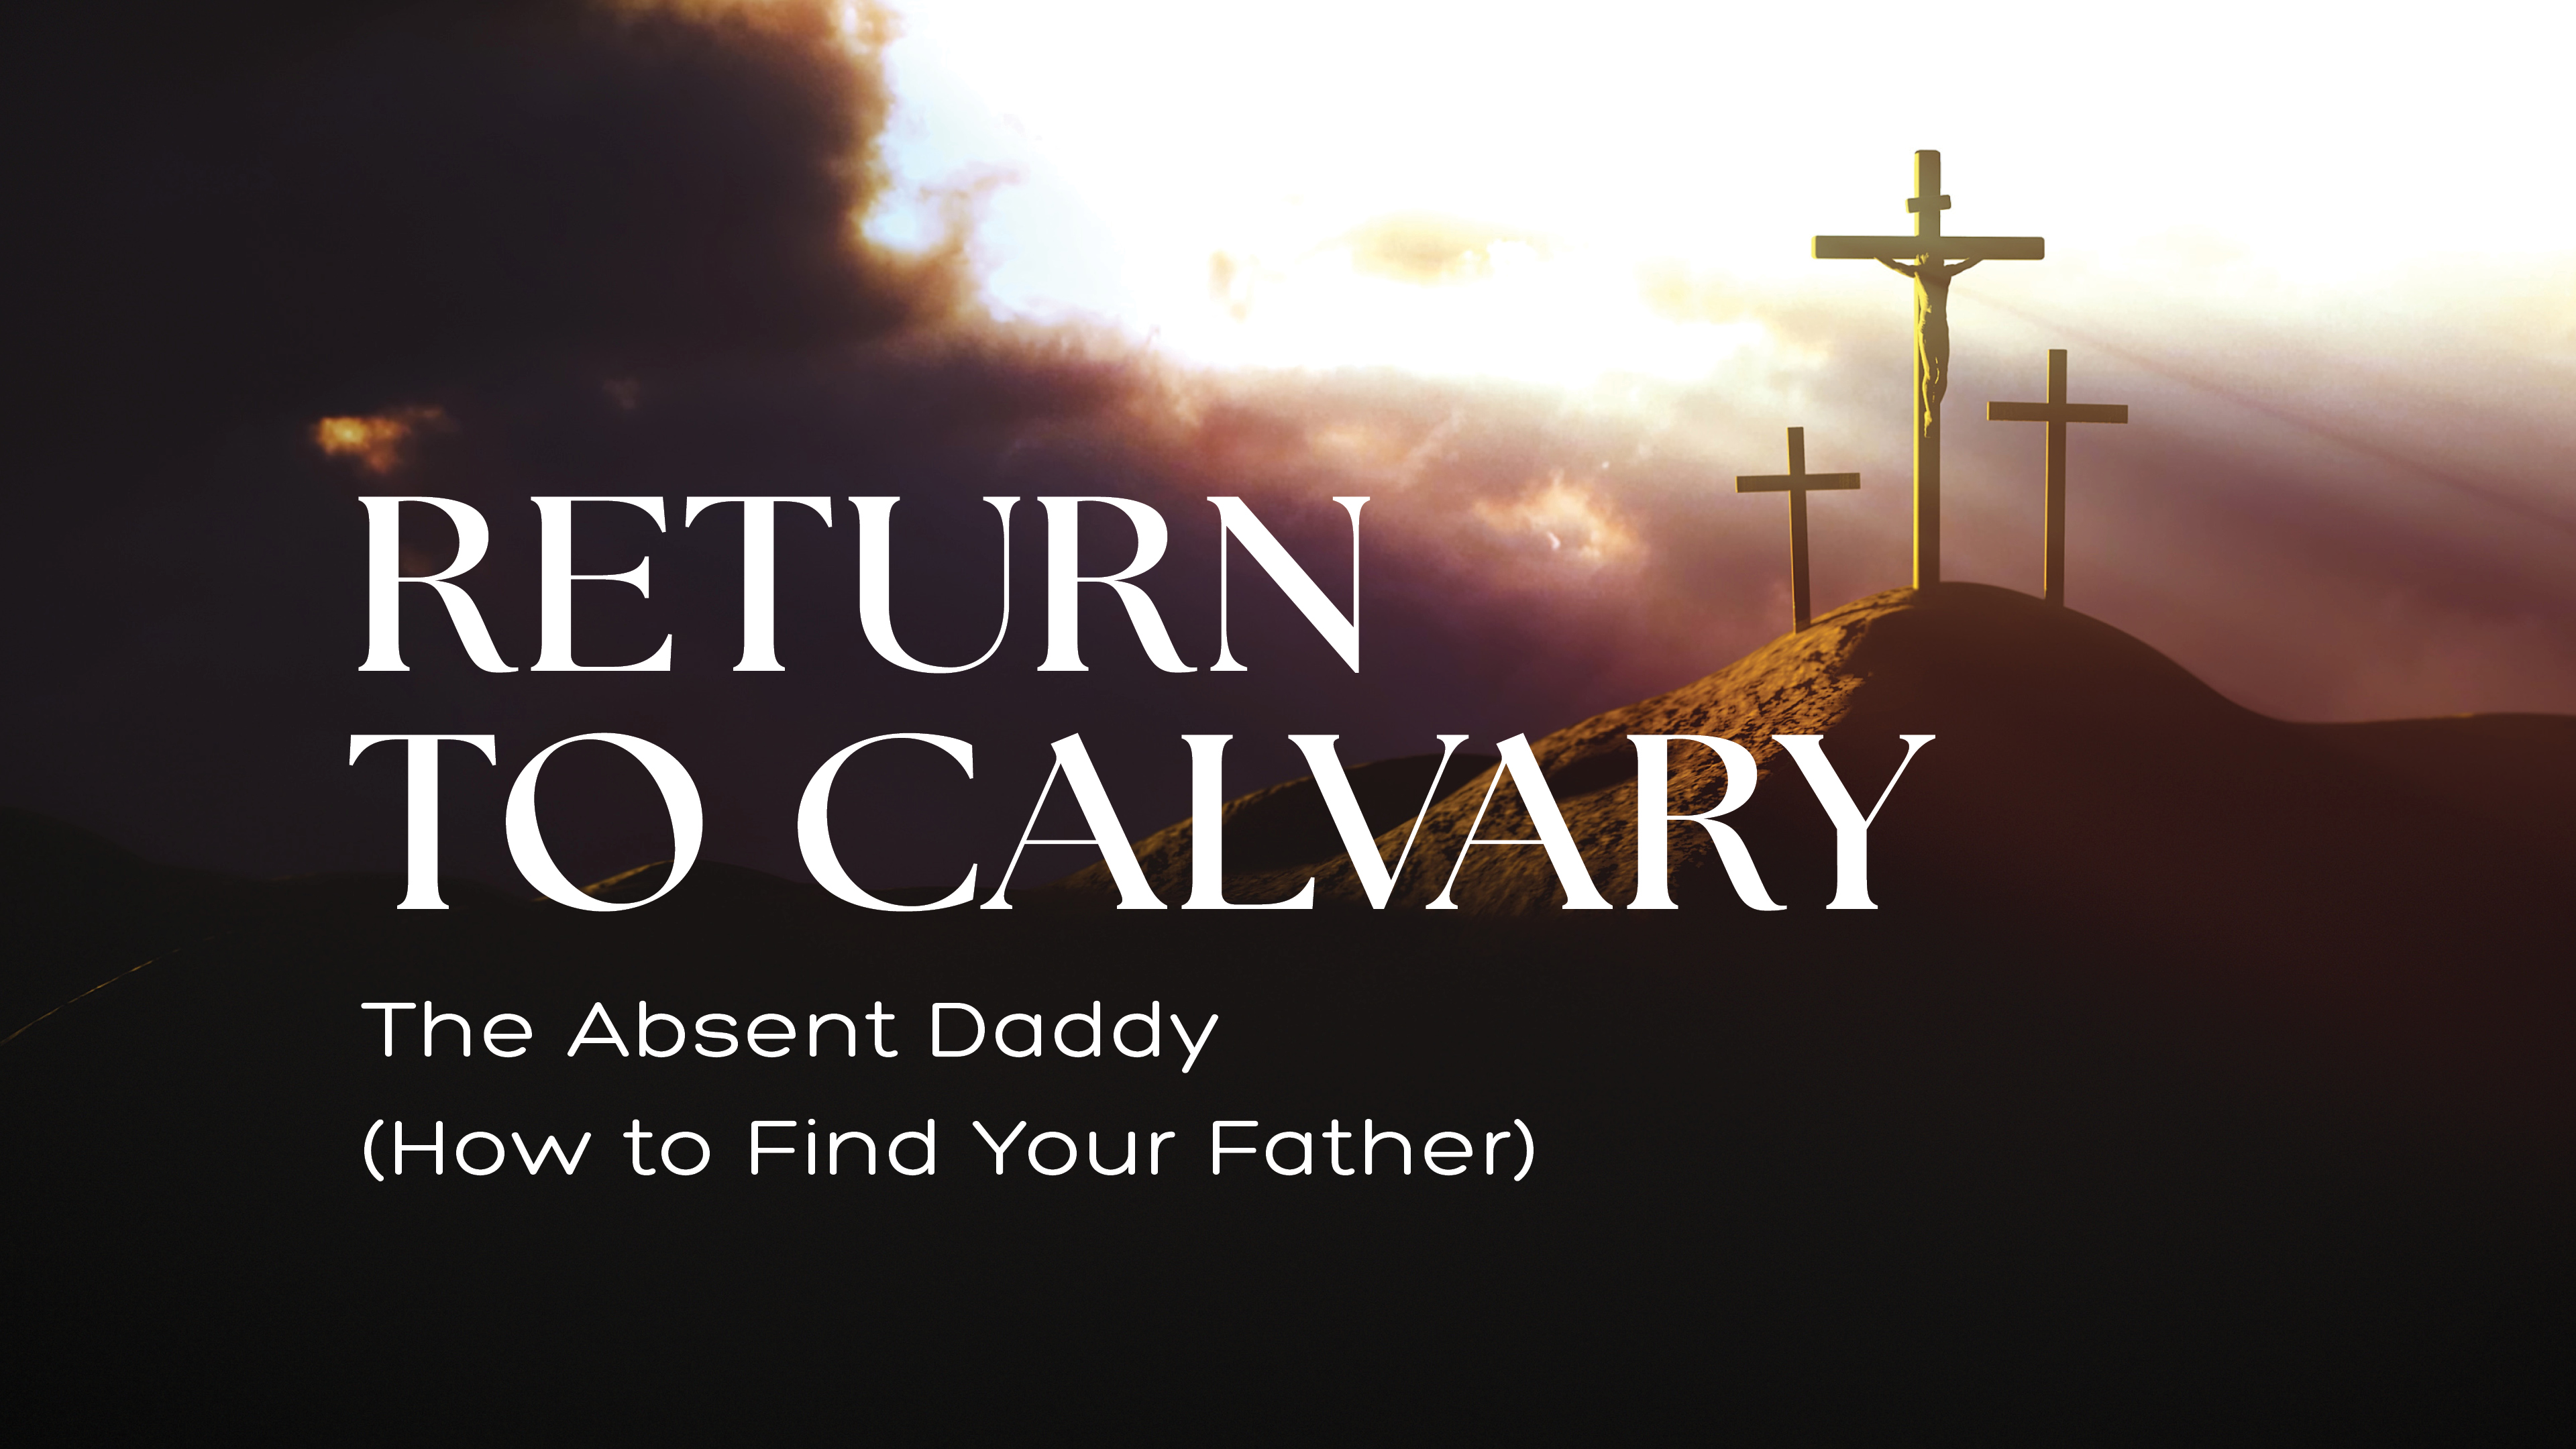 The Absent Daddy (How to Find Your Father)